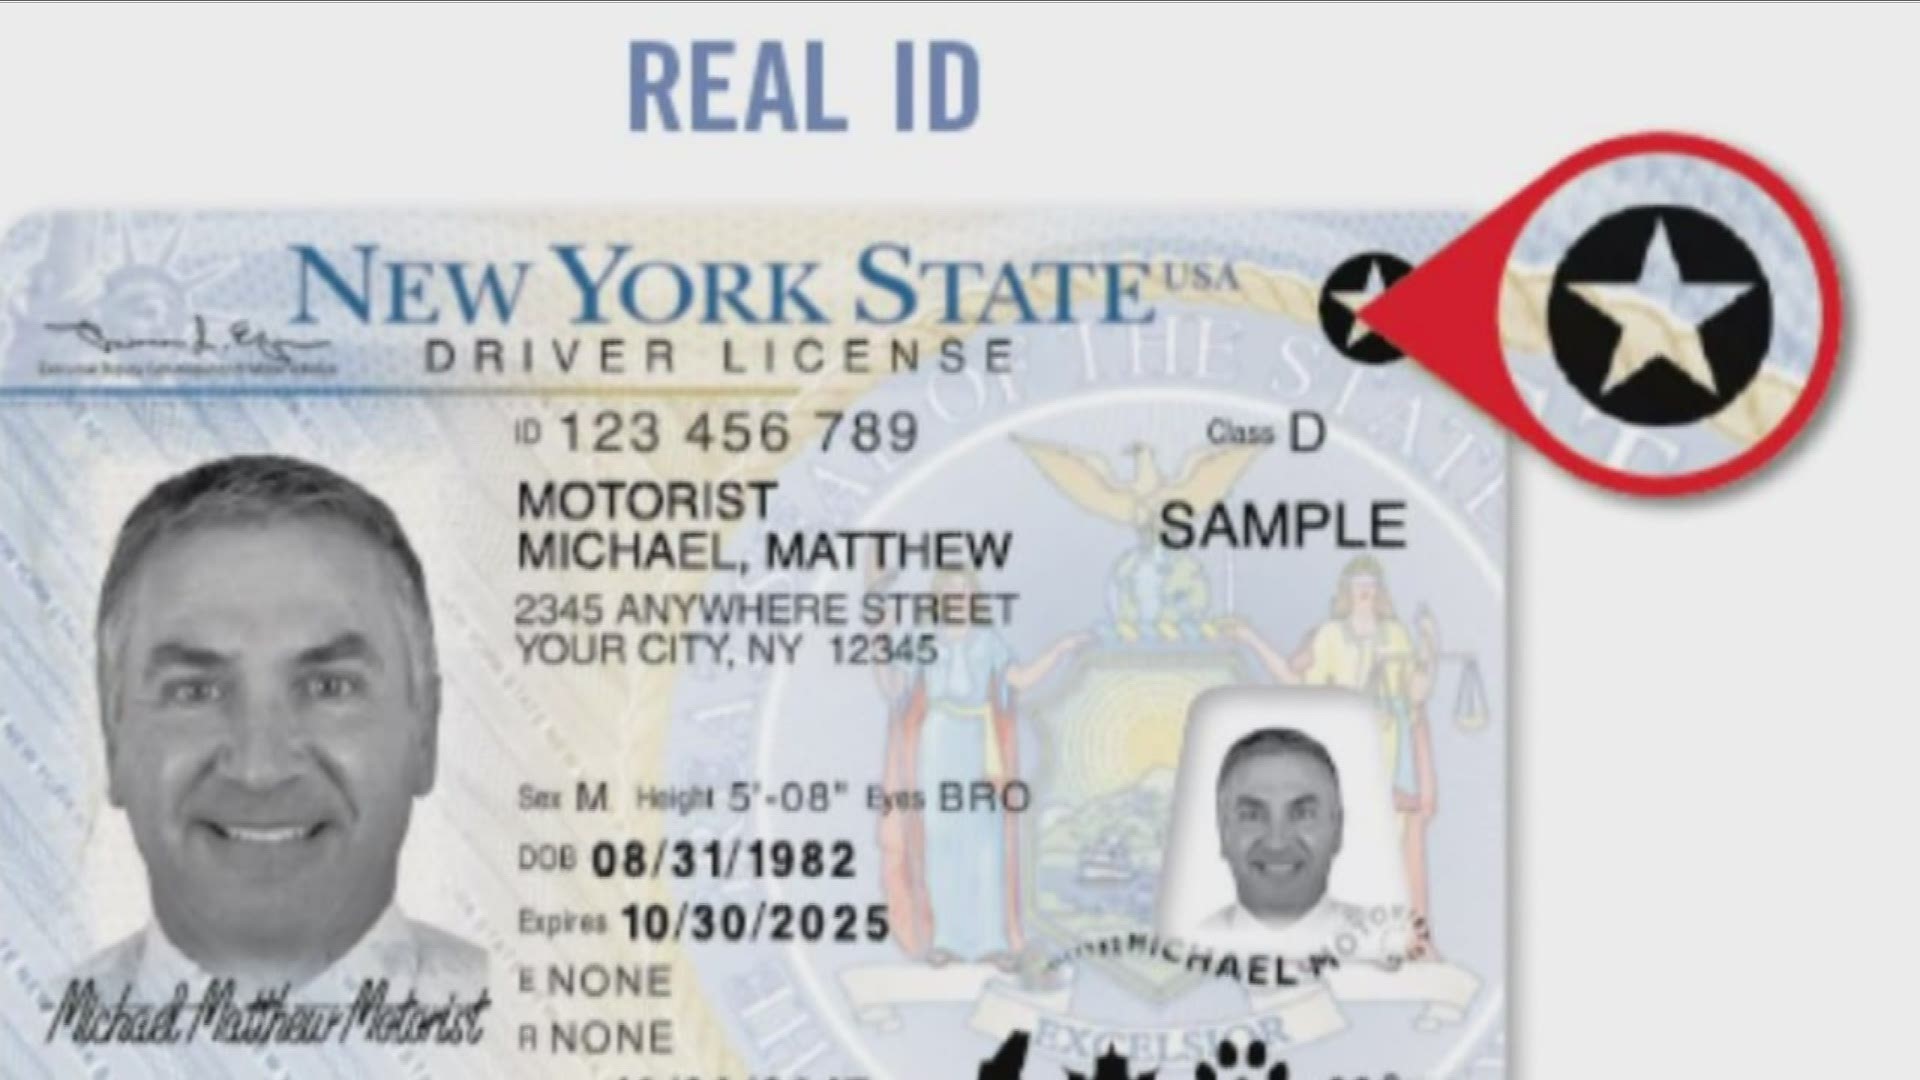 Real ID's a harder to get because of the added documentation required.